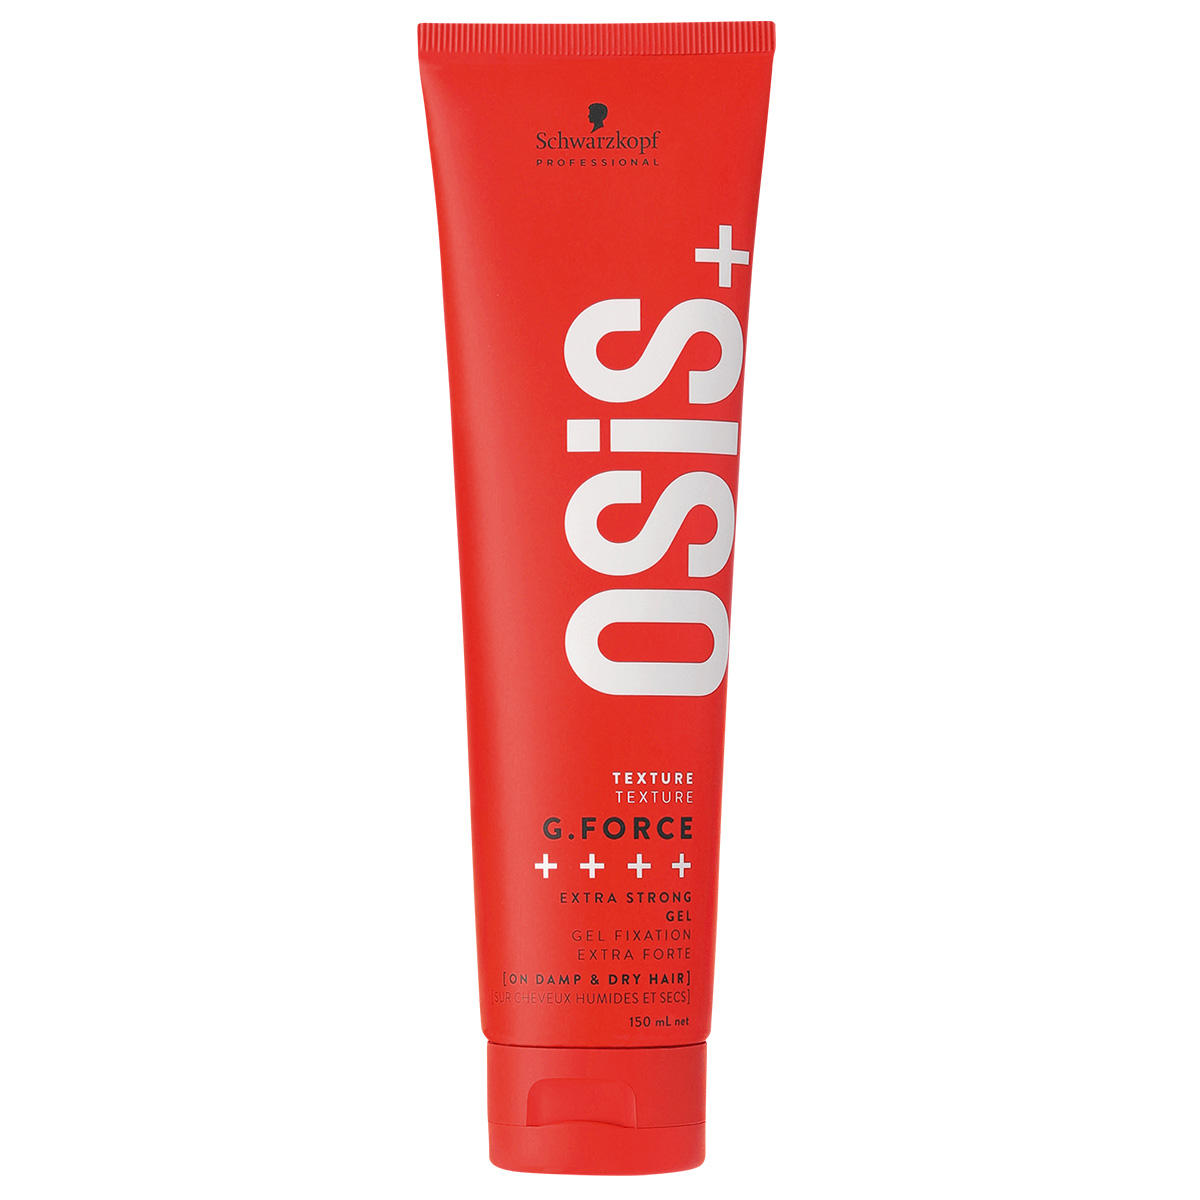 OSIS+ Texture G. Force Extra Strong Gel